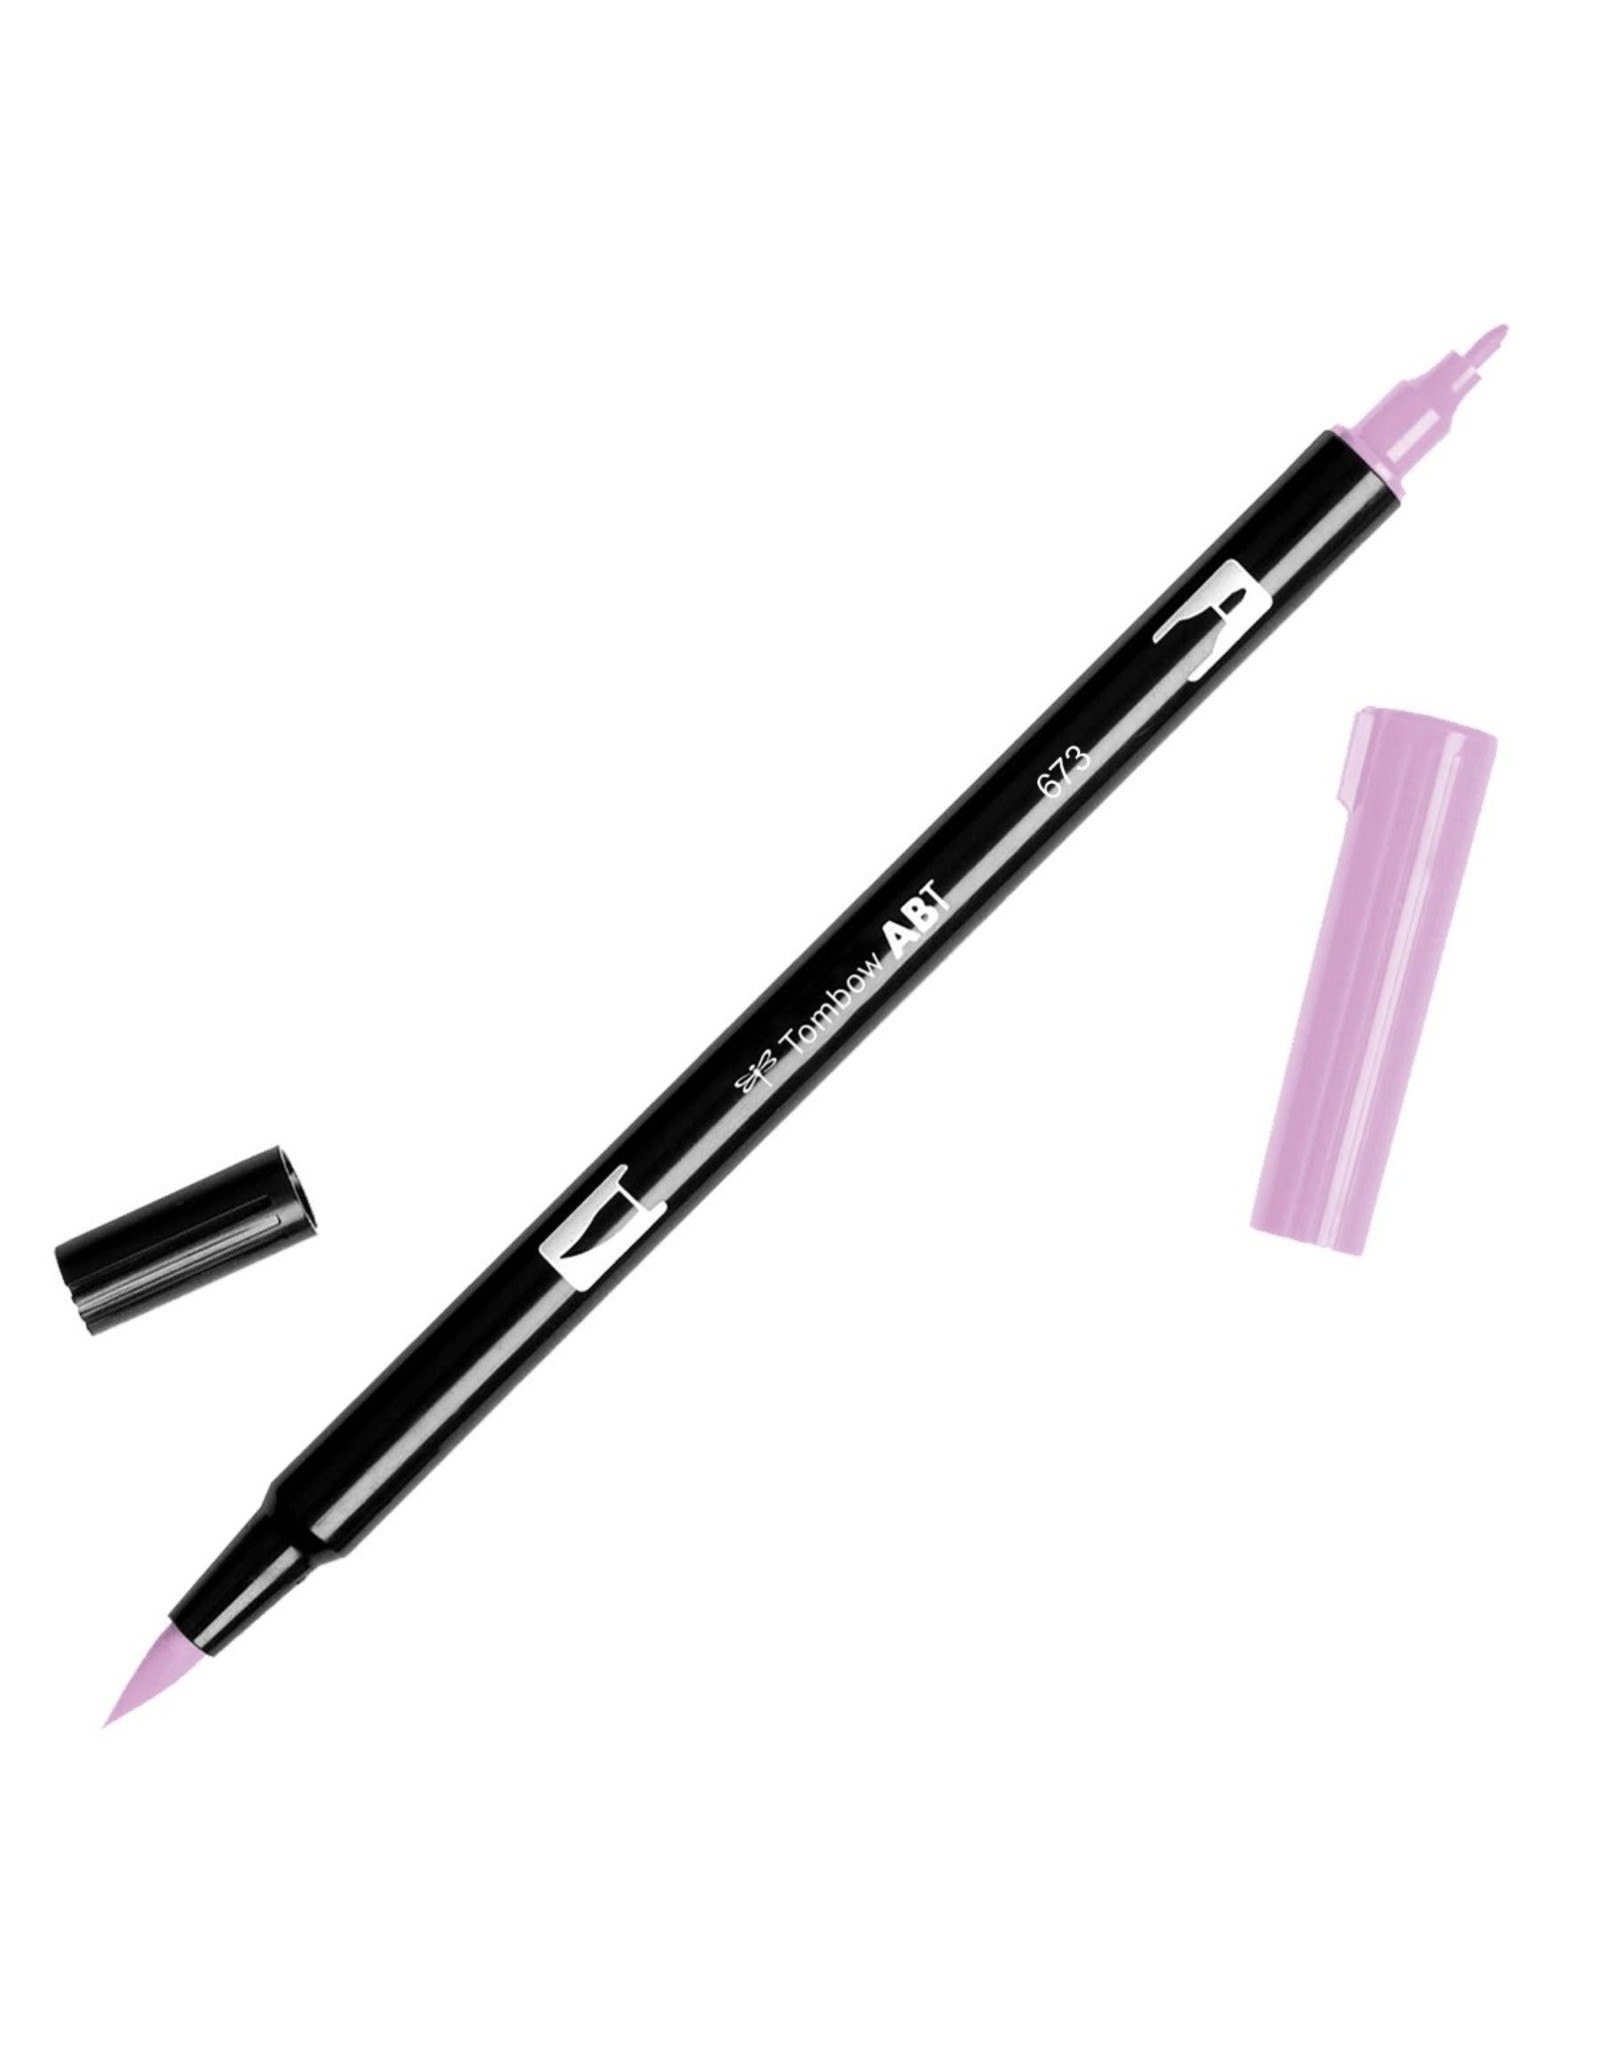 TOMBOW TOMBOW ABT-673 ORCHID DUAL BRUSH MARKER